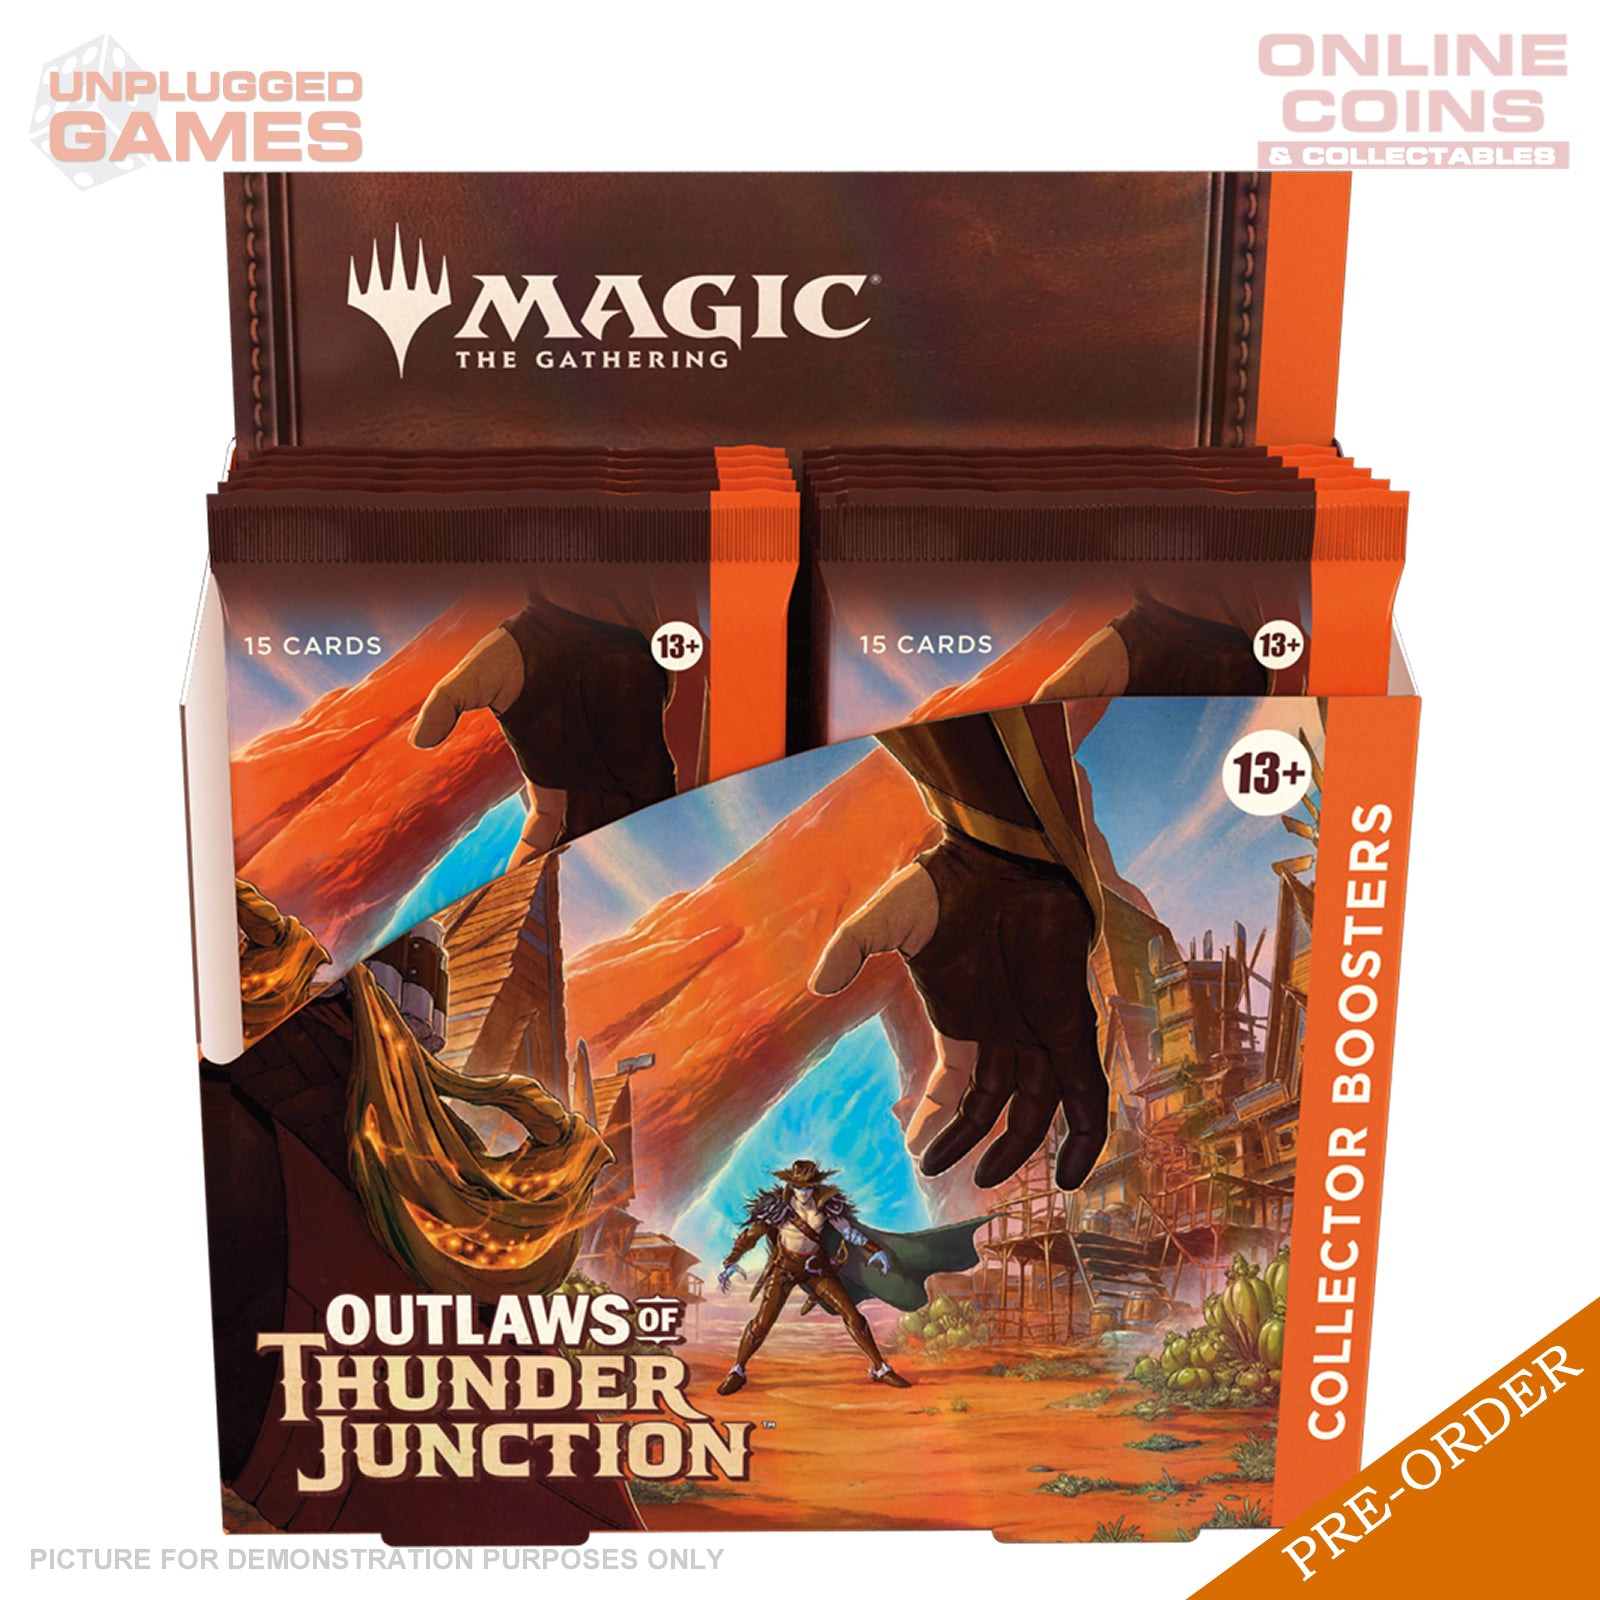 Copy of Magic the Gathering Outlaws of Thunder Junction - Collector Booster Box - 12 Packs - PREORDER